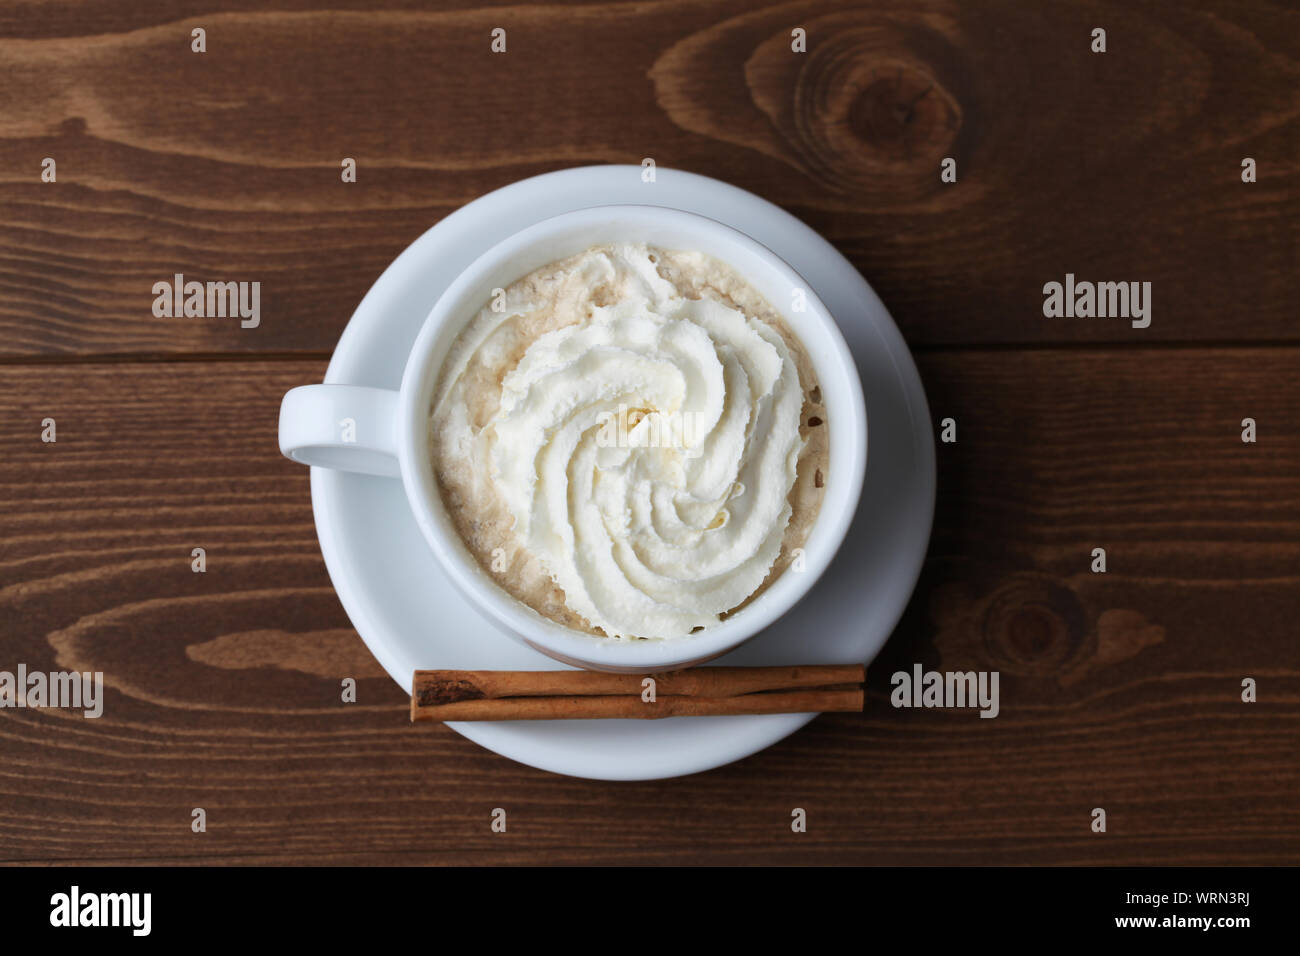 viennese coffee with whipped cream isolated on wooden table Stock Photo